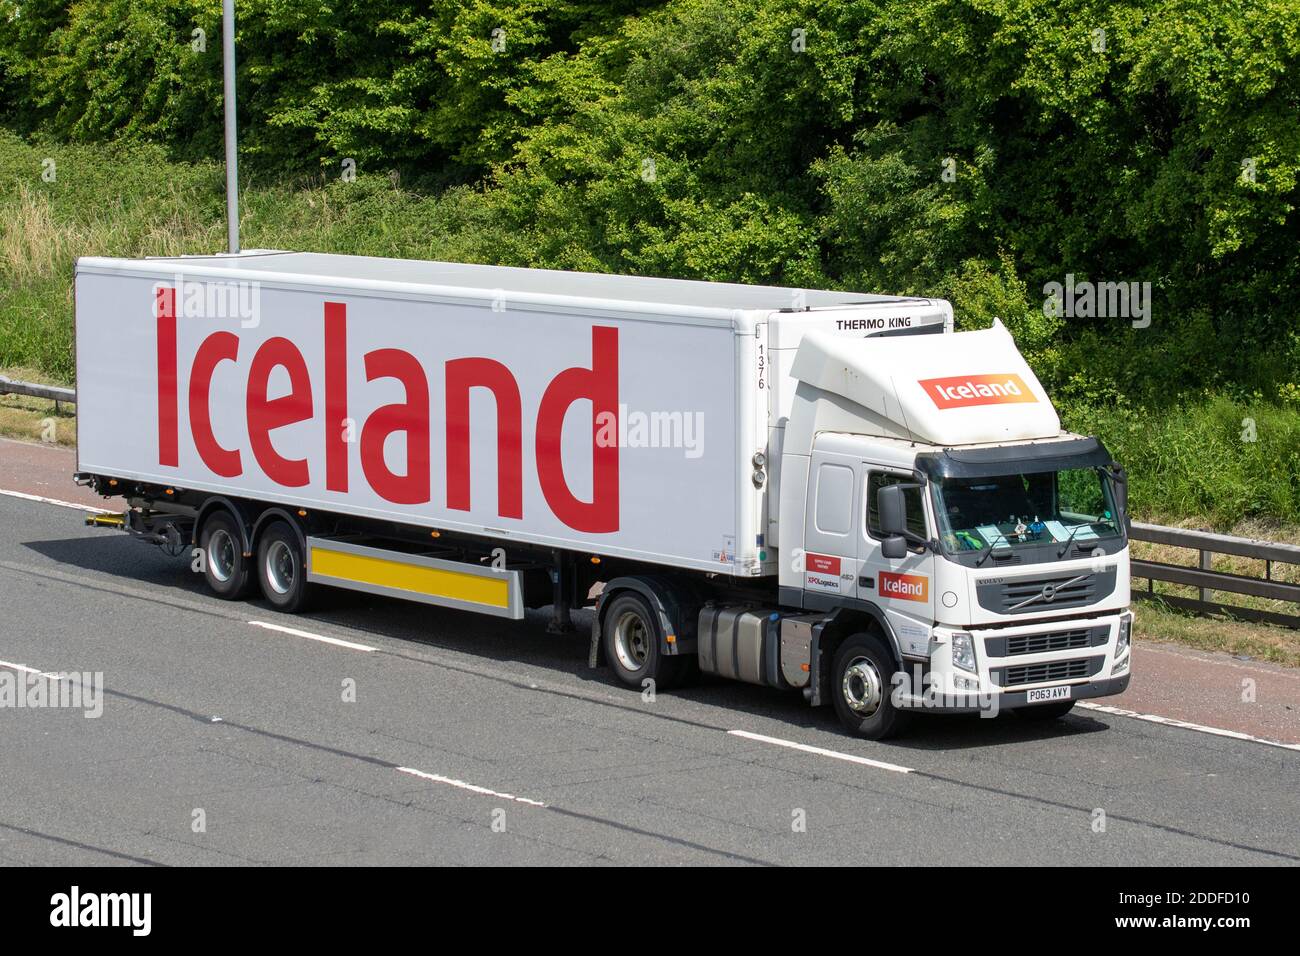 Iceland supermarket chilled HGV Haulage delivery trucks, Thermo King trtailer, lorry, transportation, truck, cargo carrier, vehicle, European commercial transport industry, M61 at Manchester, UK Stock Photo